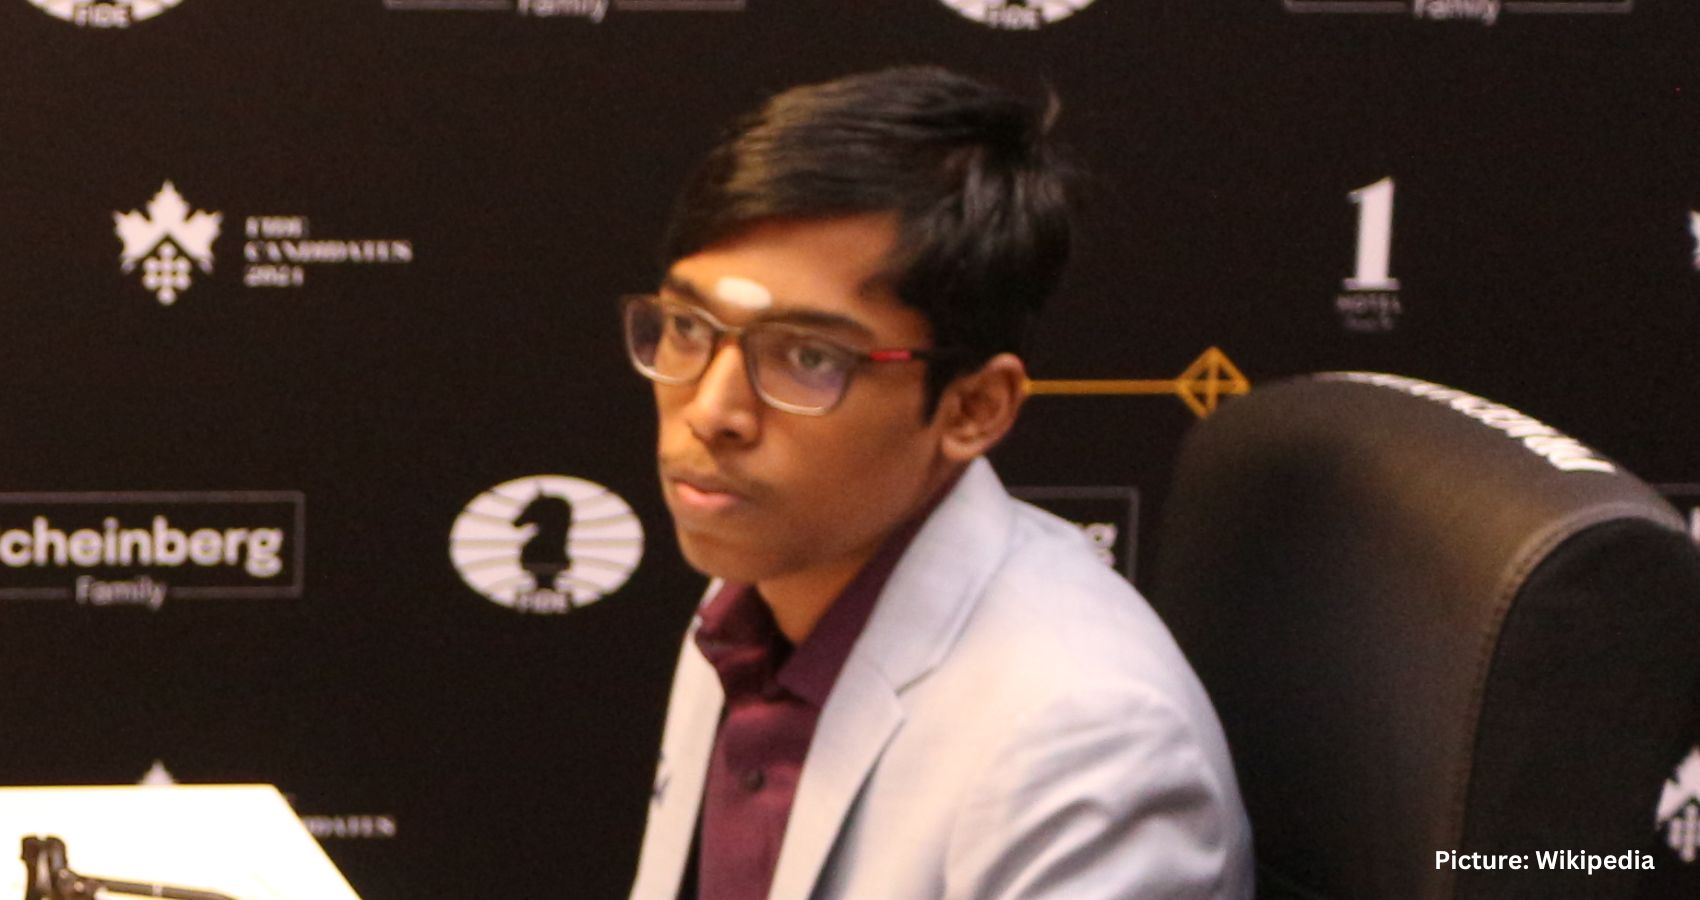 Featured & Cover 18 Year Old Indian Chess Prodigy R Praggnanandhaa Defeats World No 1 Magnus Carlsen in Landmark Victory